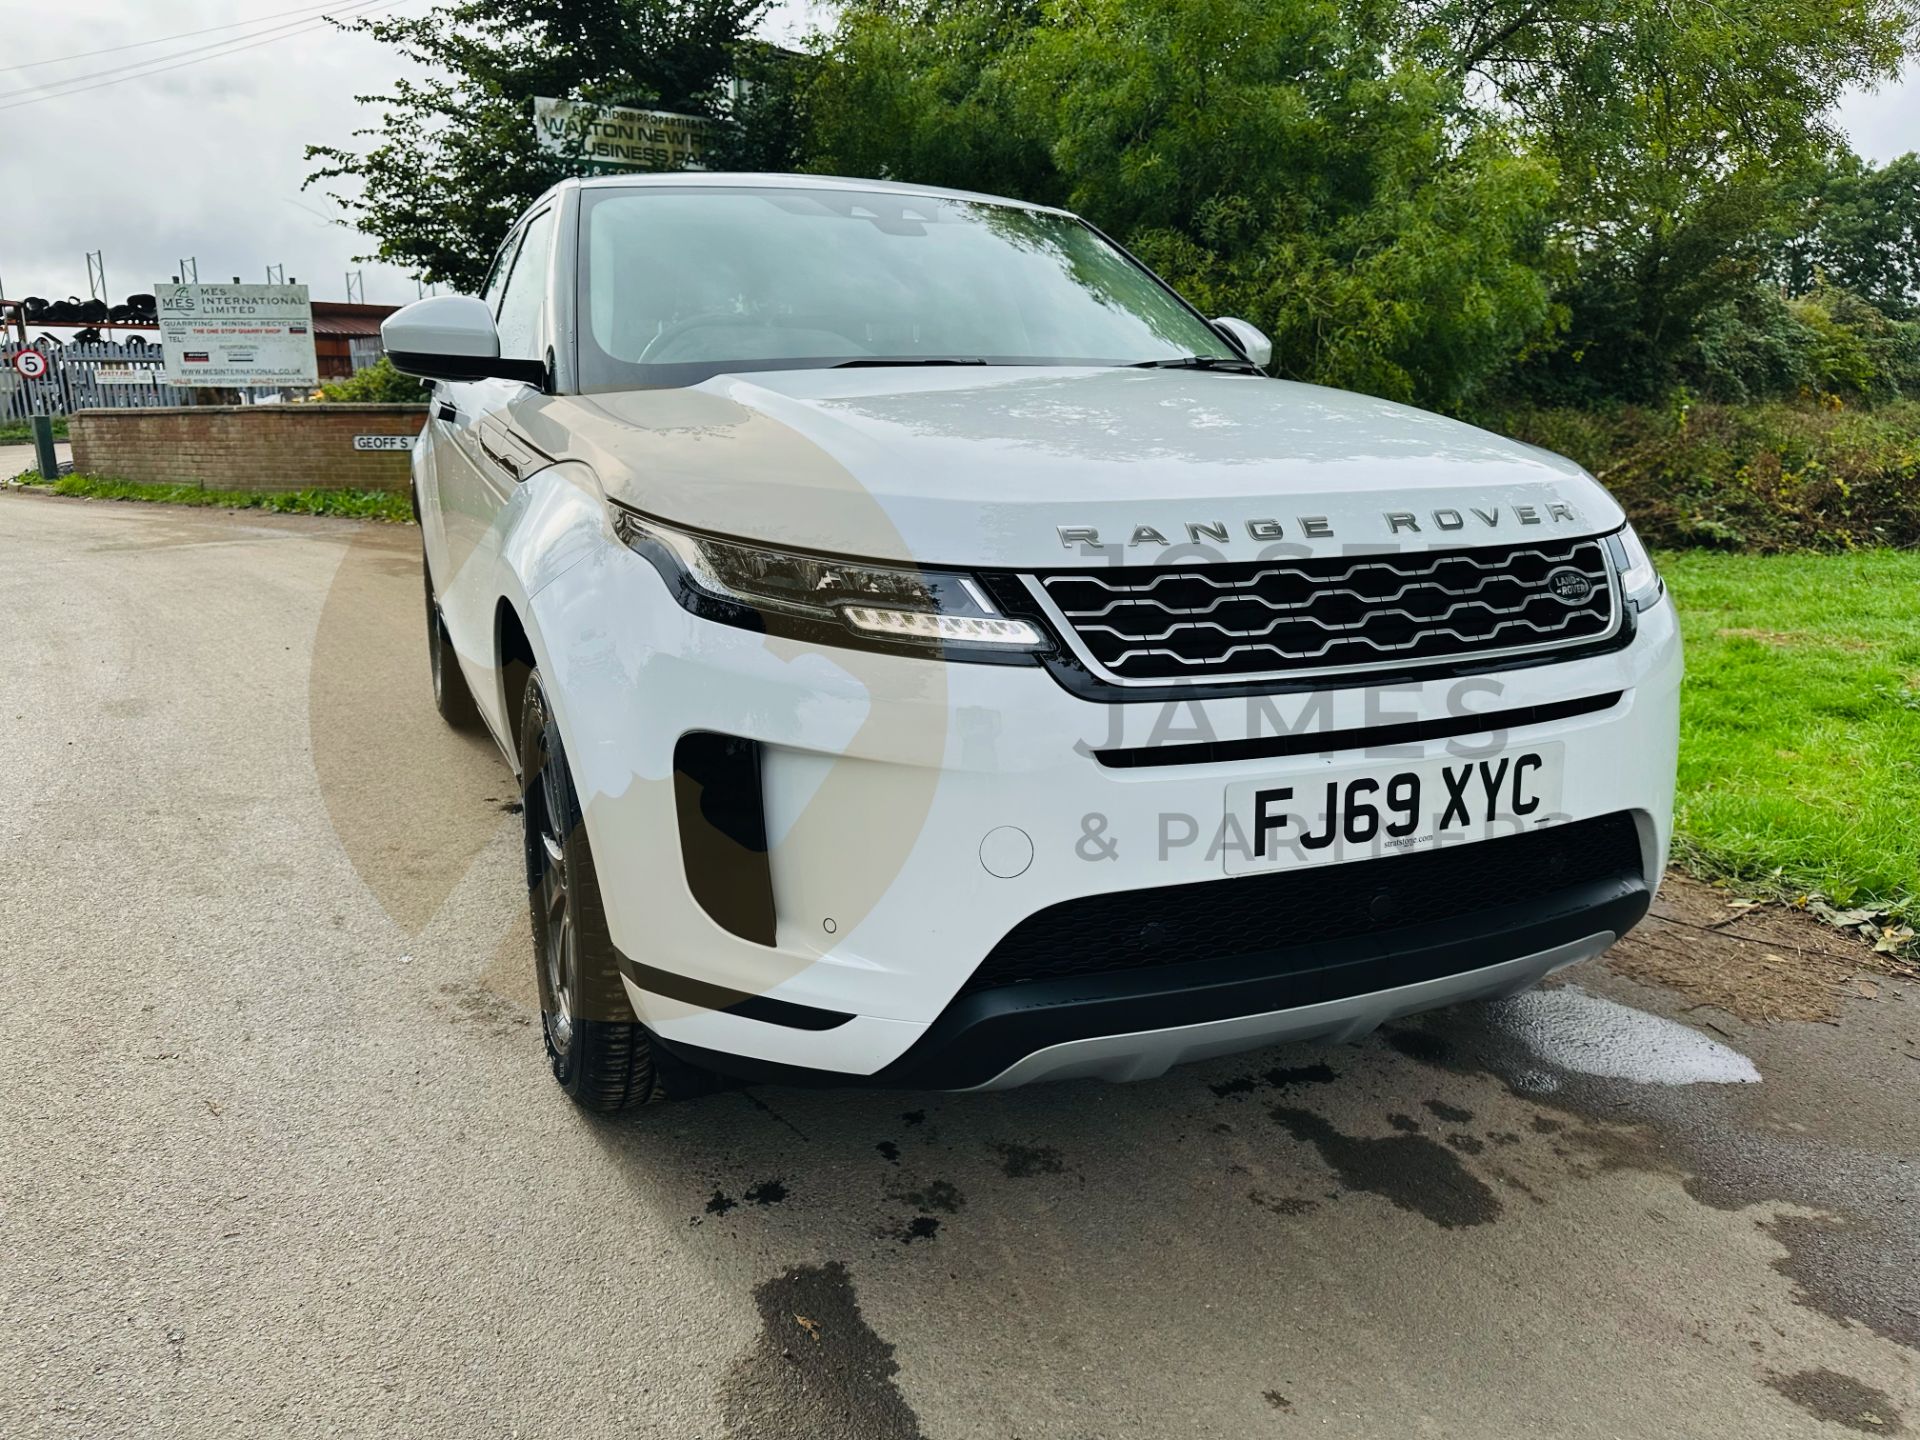 (ON SALE) LAND ROVER RANGE ROVER EVOQUE 2.0d AUTO-START STOP (2020 MODEL) ONLY 33K MILES FROM NEW - Image 3 of 41